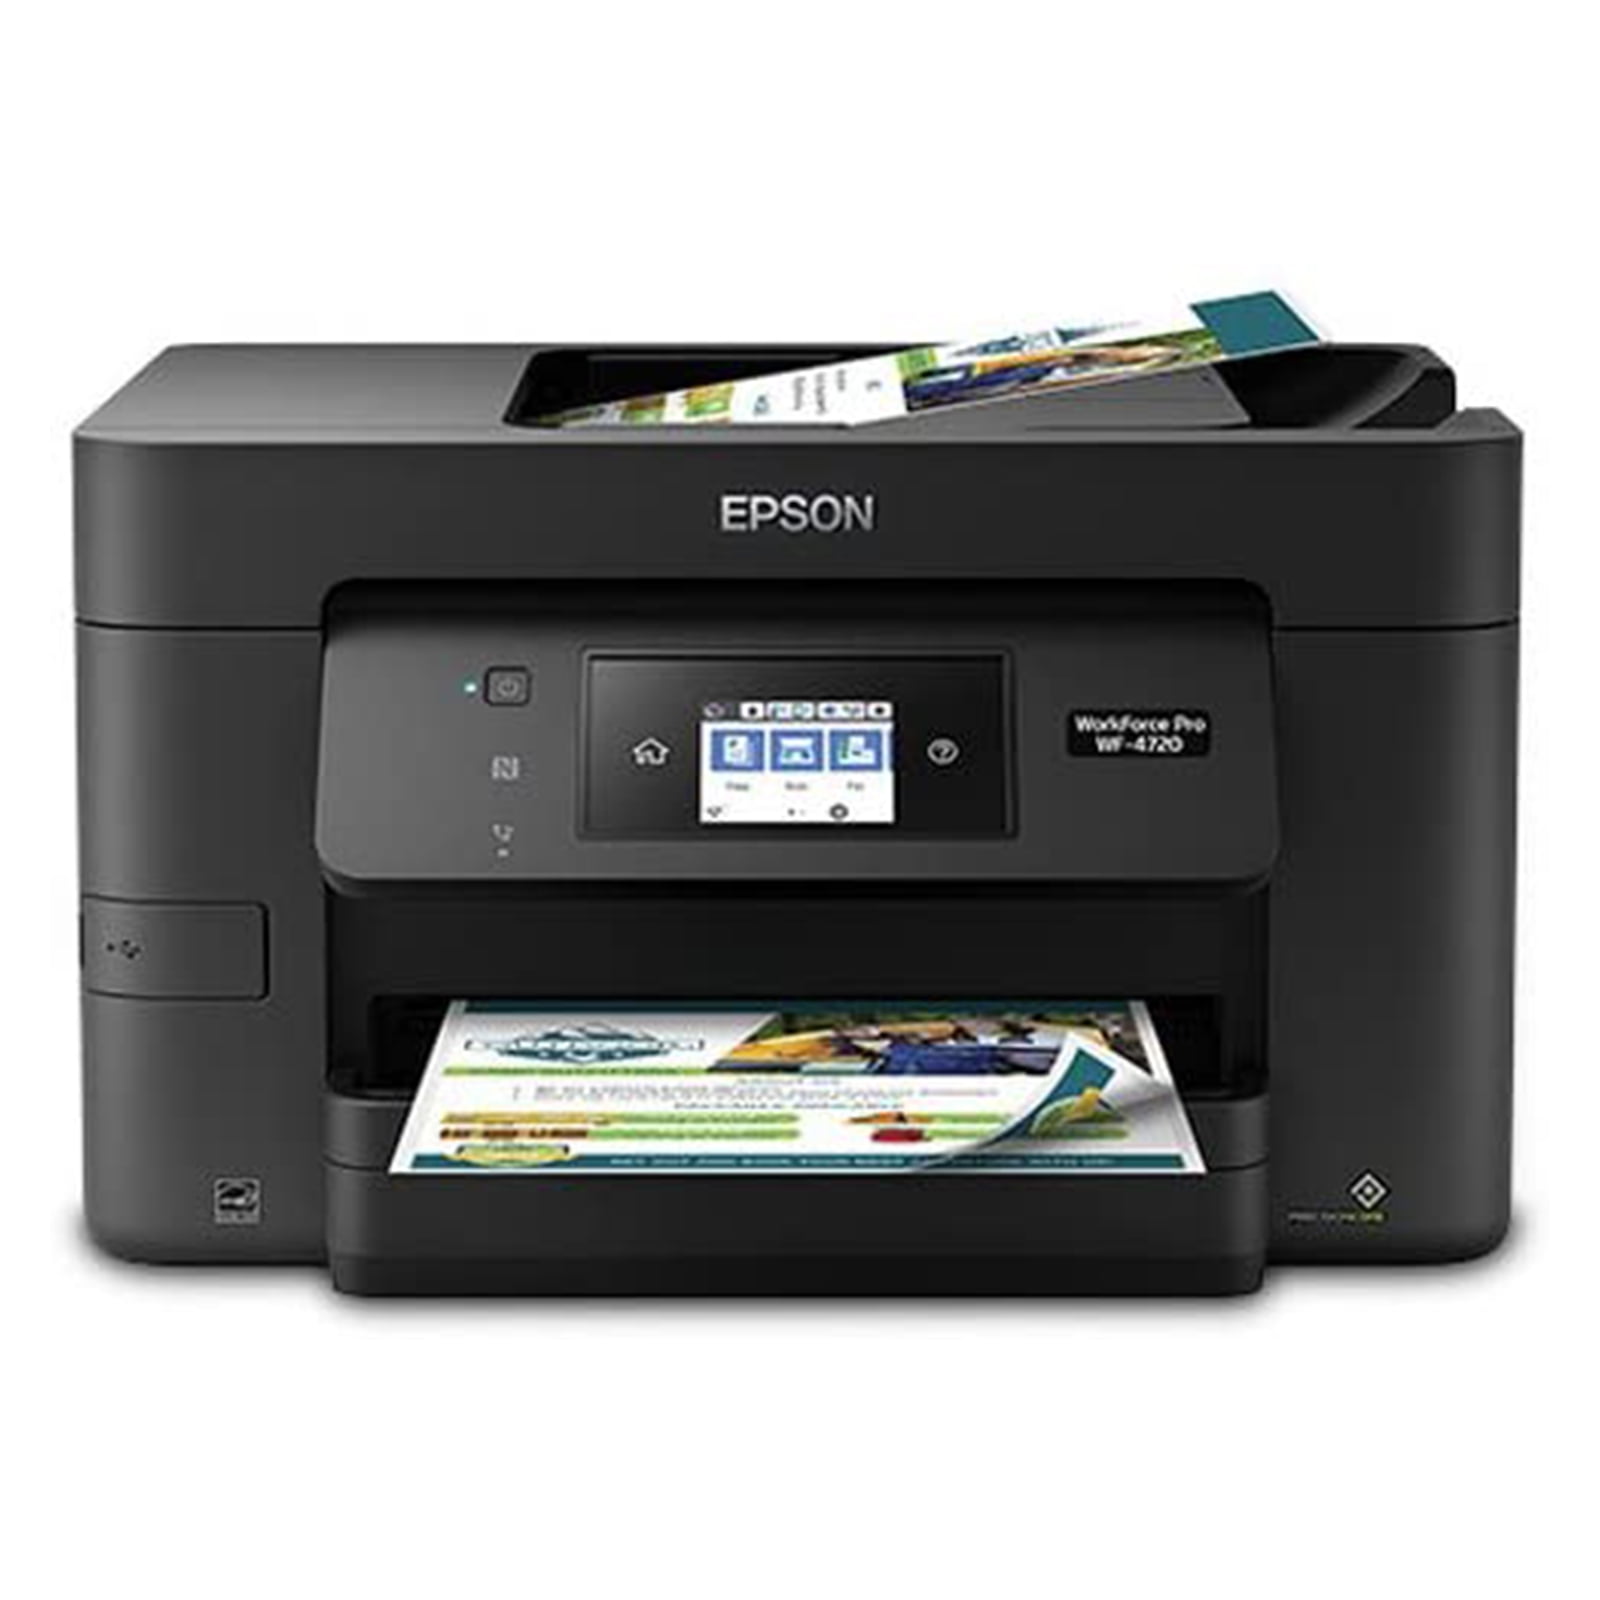 Epson WorkForce Pro WF-4720 All-in-One Color Wireless Inkjet Printer, Copier, Scanner with Wi-Fi Direct (C11CF74201)